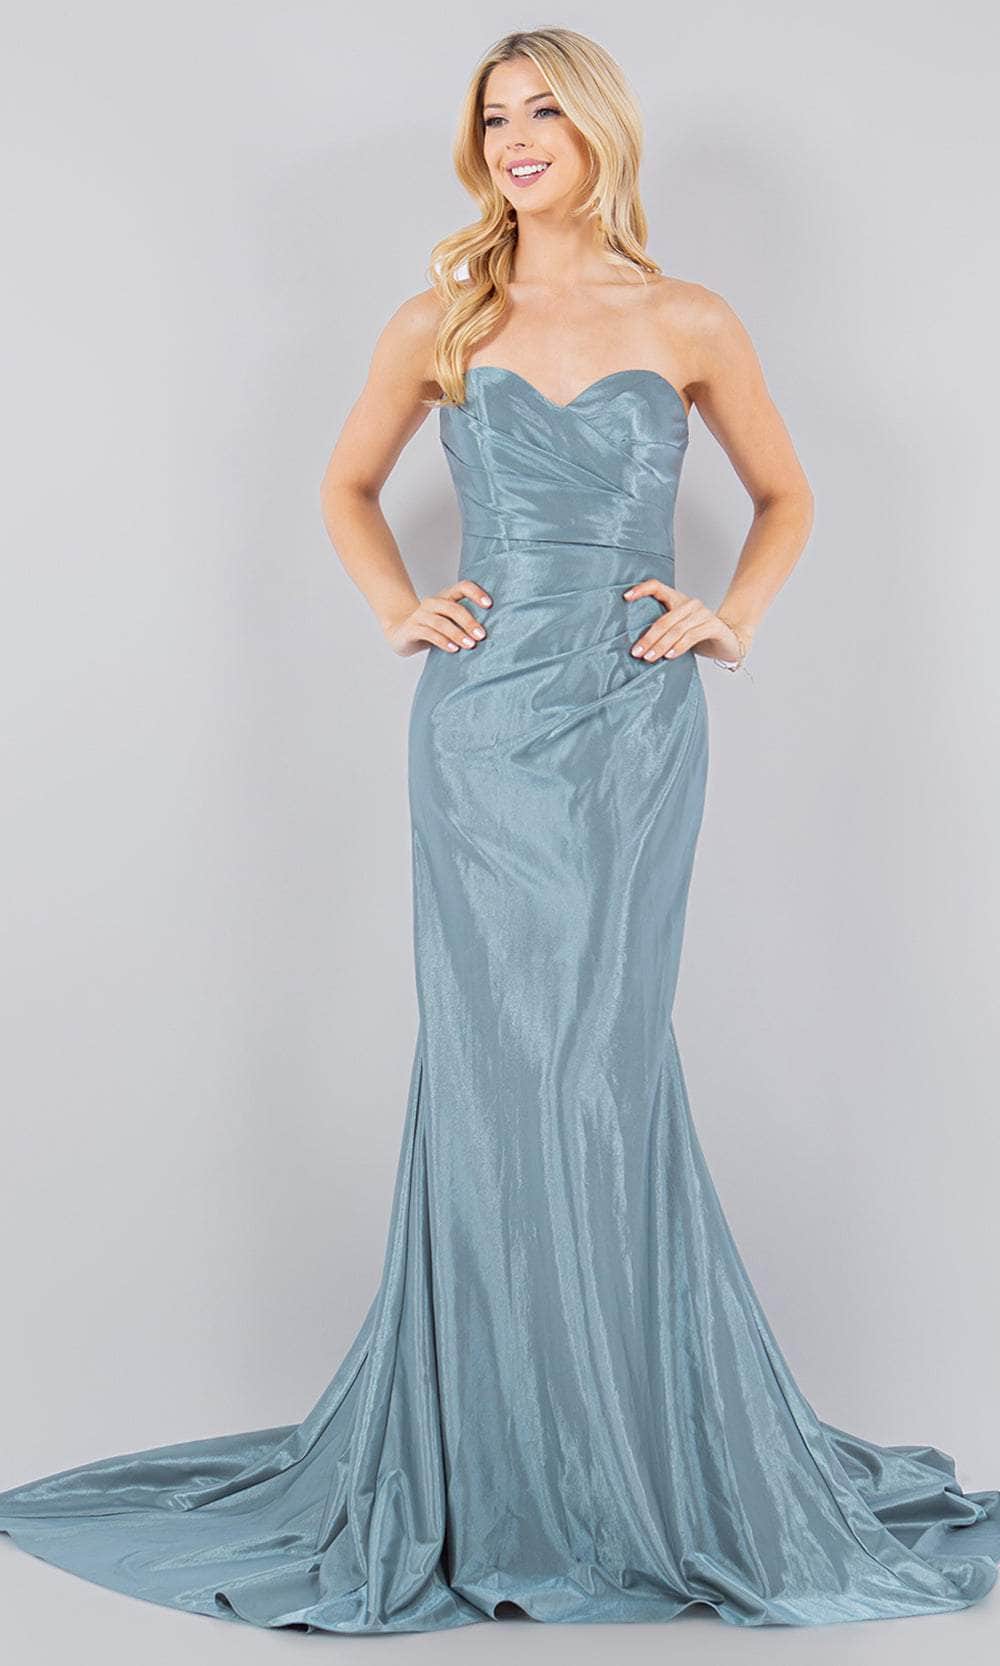 Cinderella Couture 8083J - Strapless Satin Prom Gown Special Occasion Dress